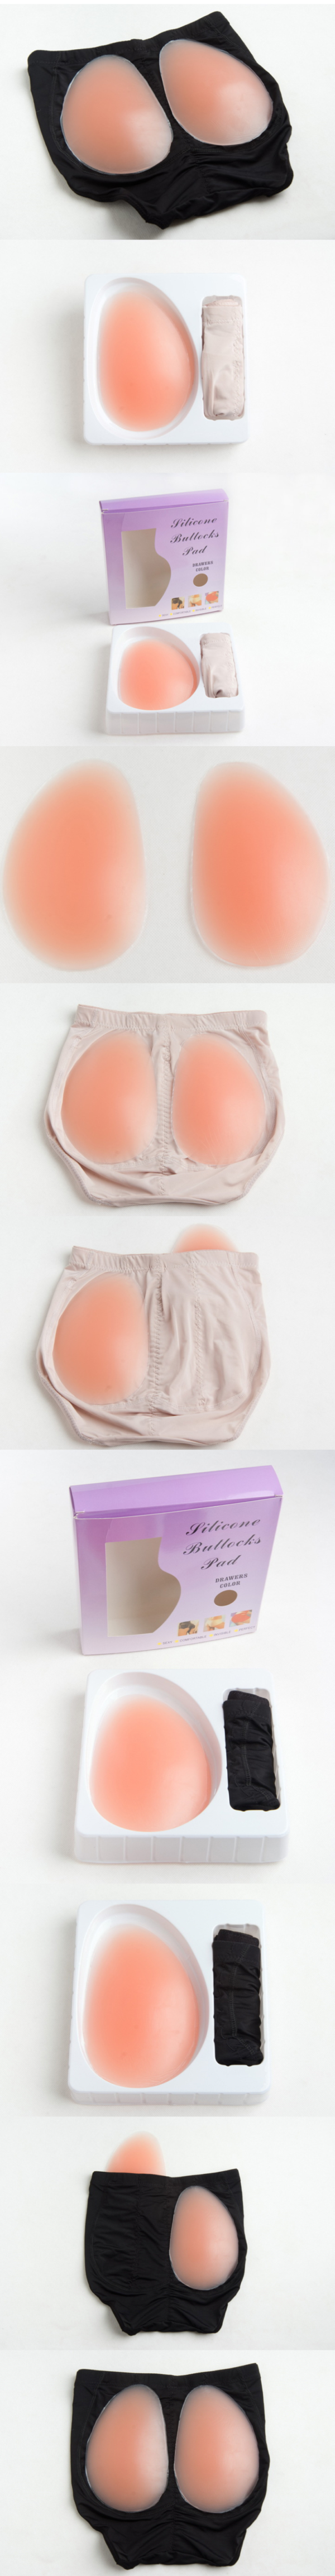 Silicone Buttocks Padded Panties